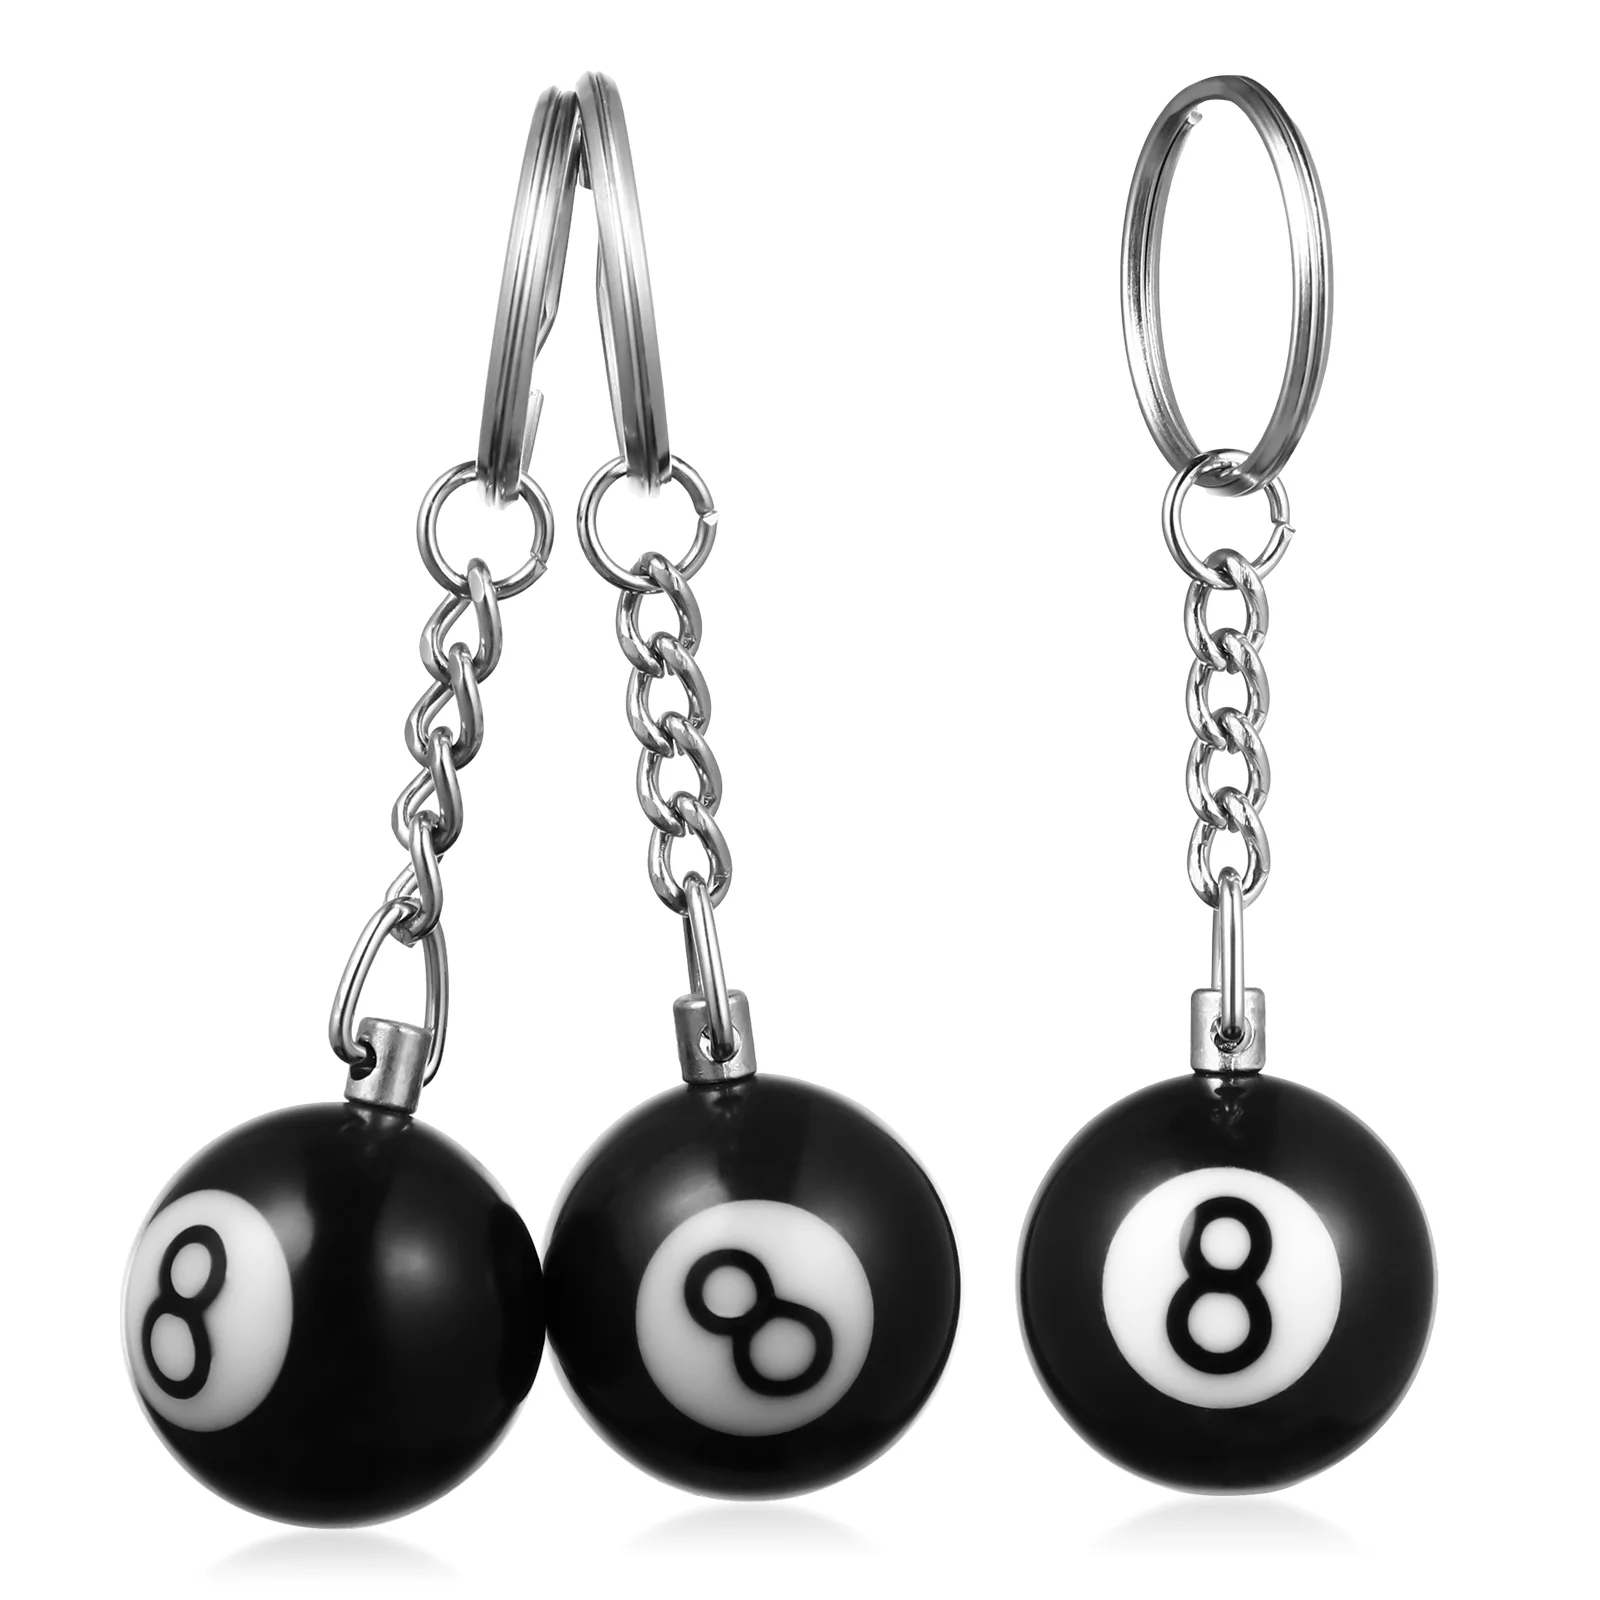 Ball Billiards Pool Key Sports Rings Billiard Gifts Match Charm Hanging Keyrings Pendants Chain Balls Mini Metal Keepsakes inflatables children inflatable rabbit rings toys kindergarten outdoor throwing sports colorful pvc plastic puzzle child toy